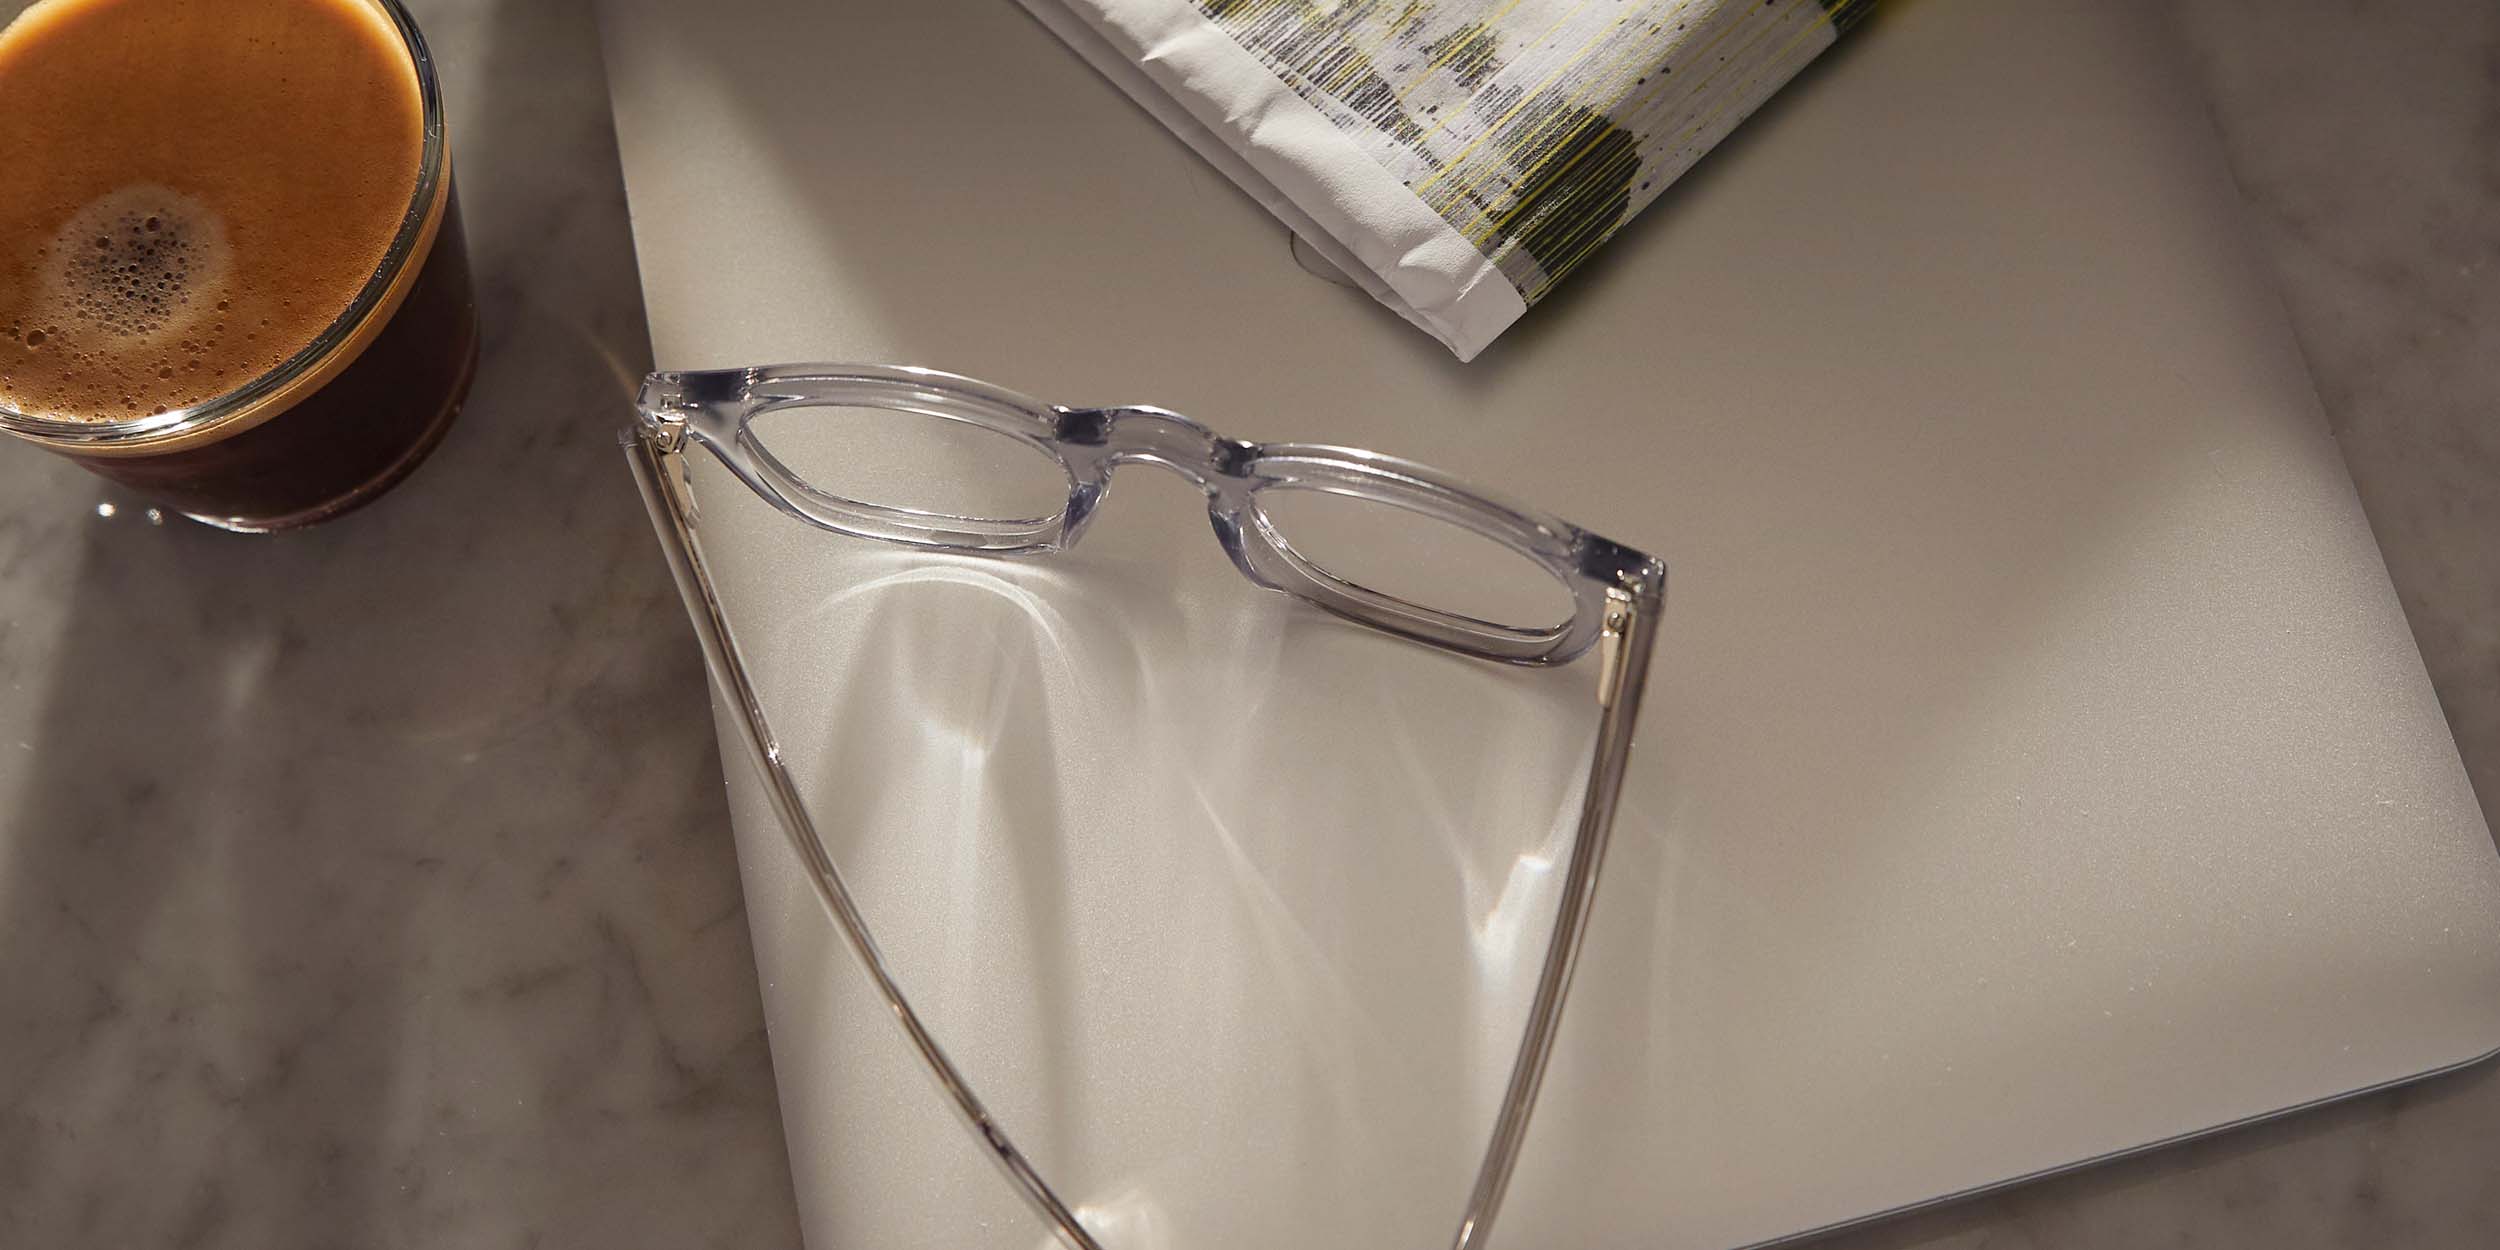 Photo Details of Thomas Cobalt Reading Glasses in a room